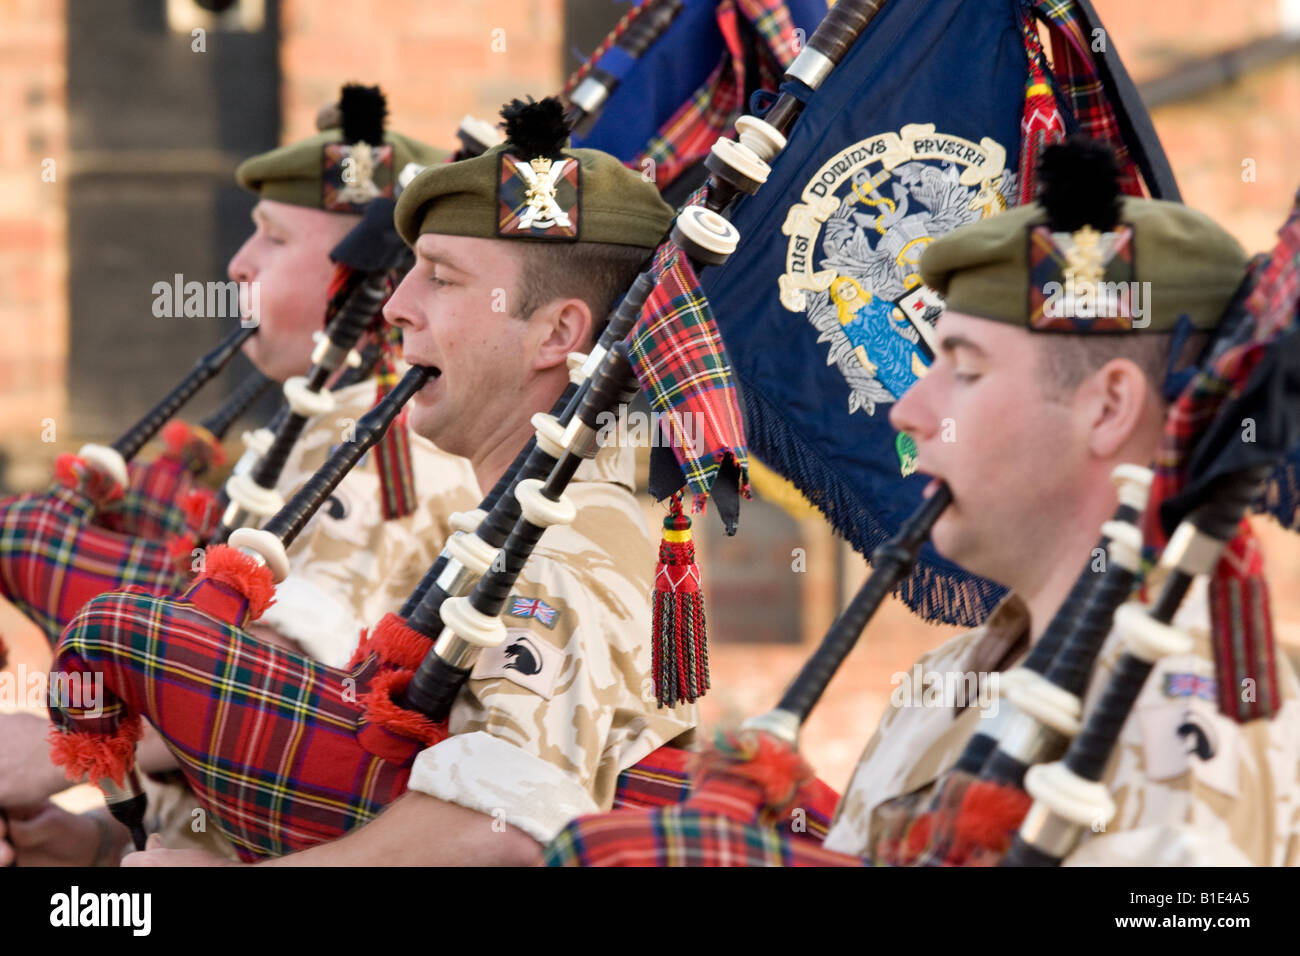 The Royal Regiment of Scotland military band soldiers bagpipers playing the pipes in desert fatigues in Dumfries Scotland UK Stock Photo